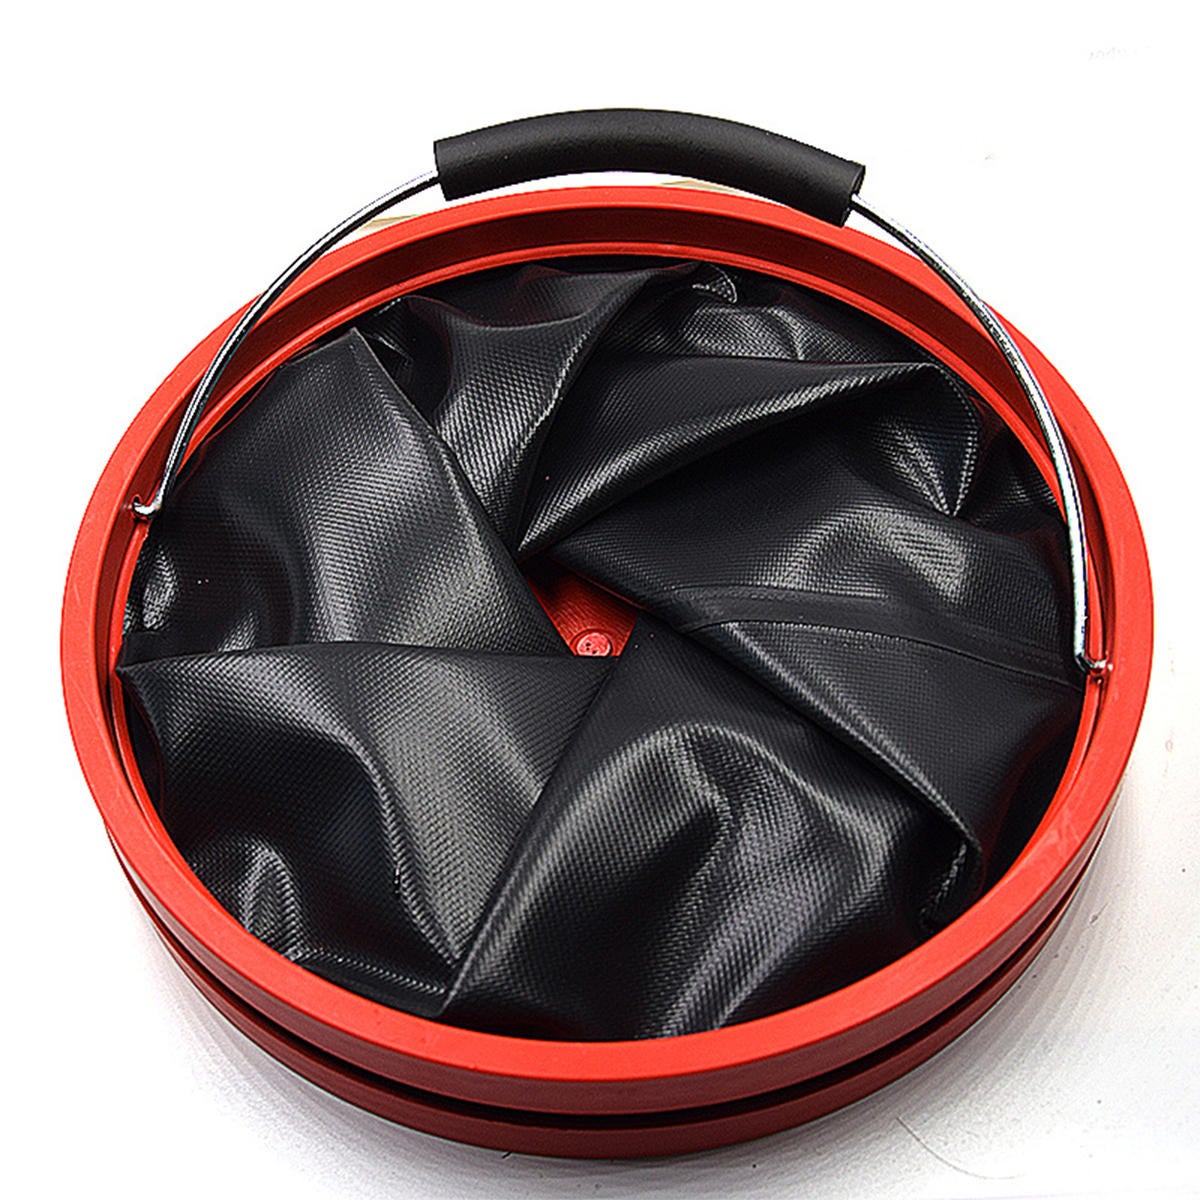 12L Collapsible Folding Water Bucket For Outdoor Boating Camping Fishing Car Washing